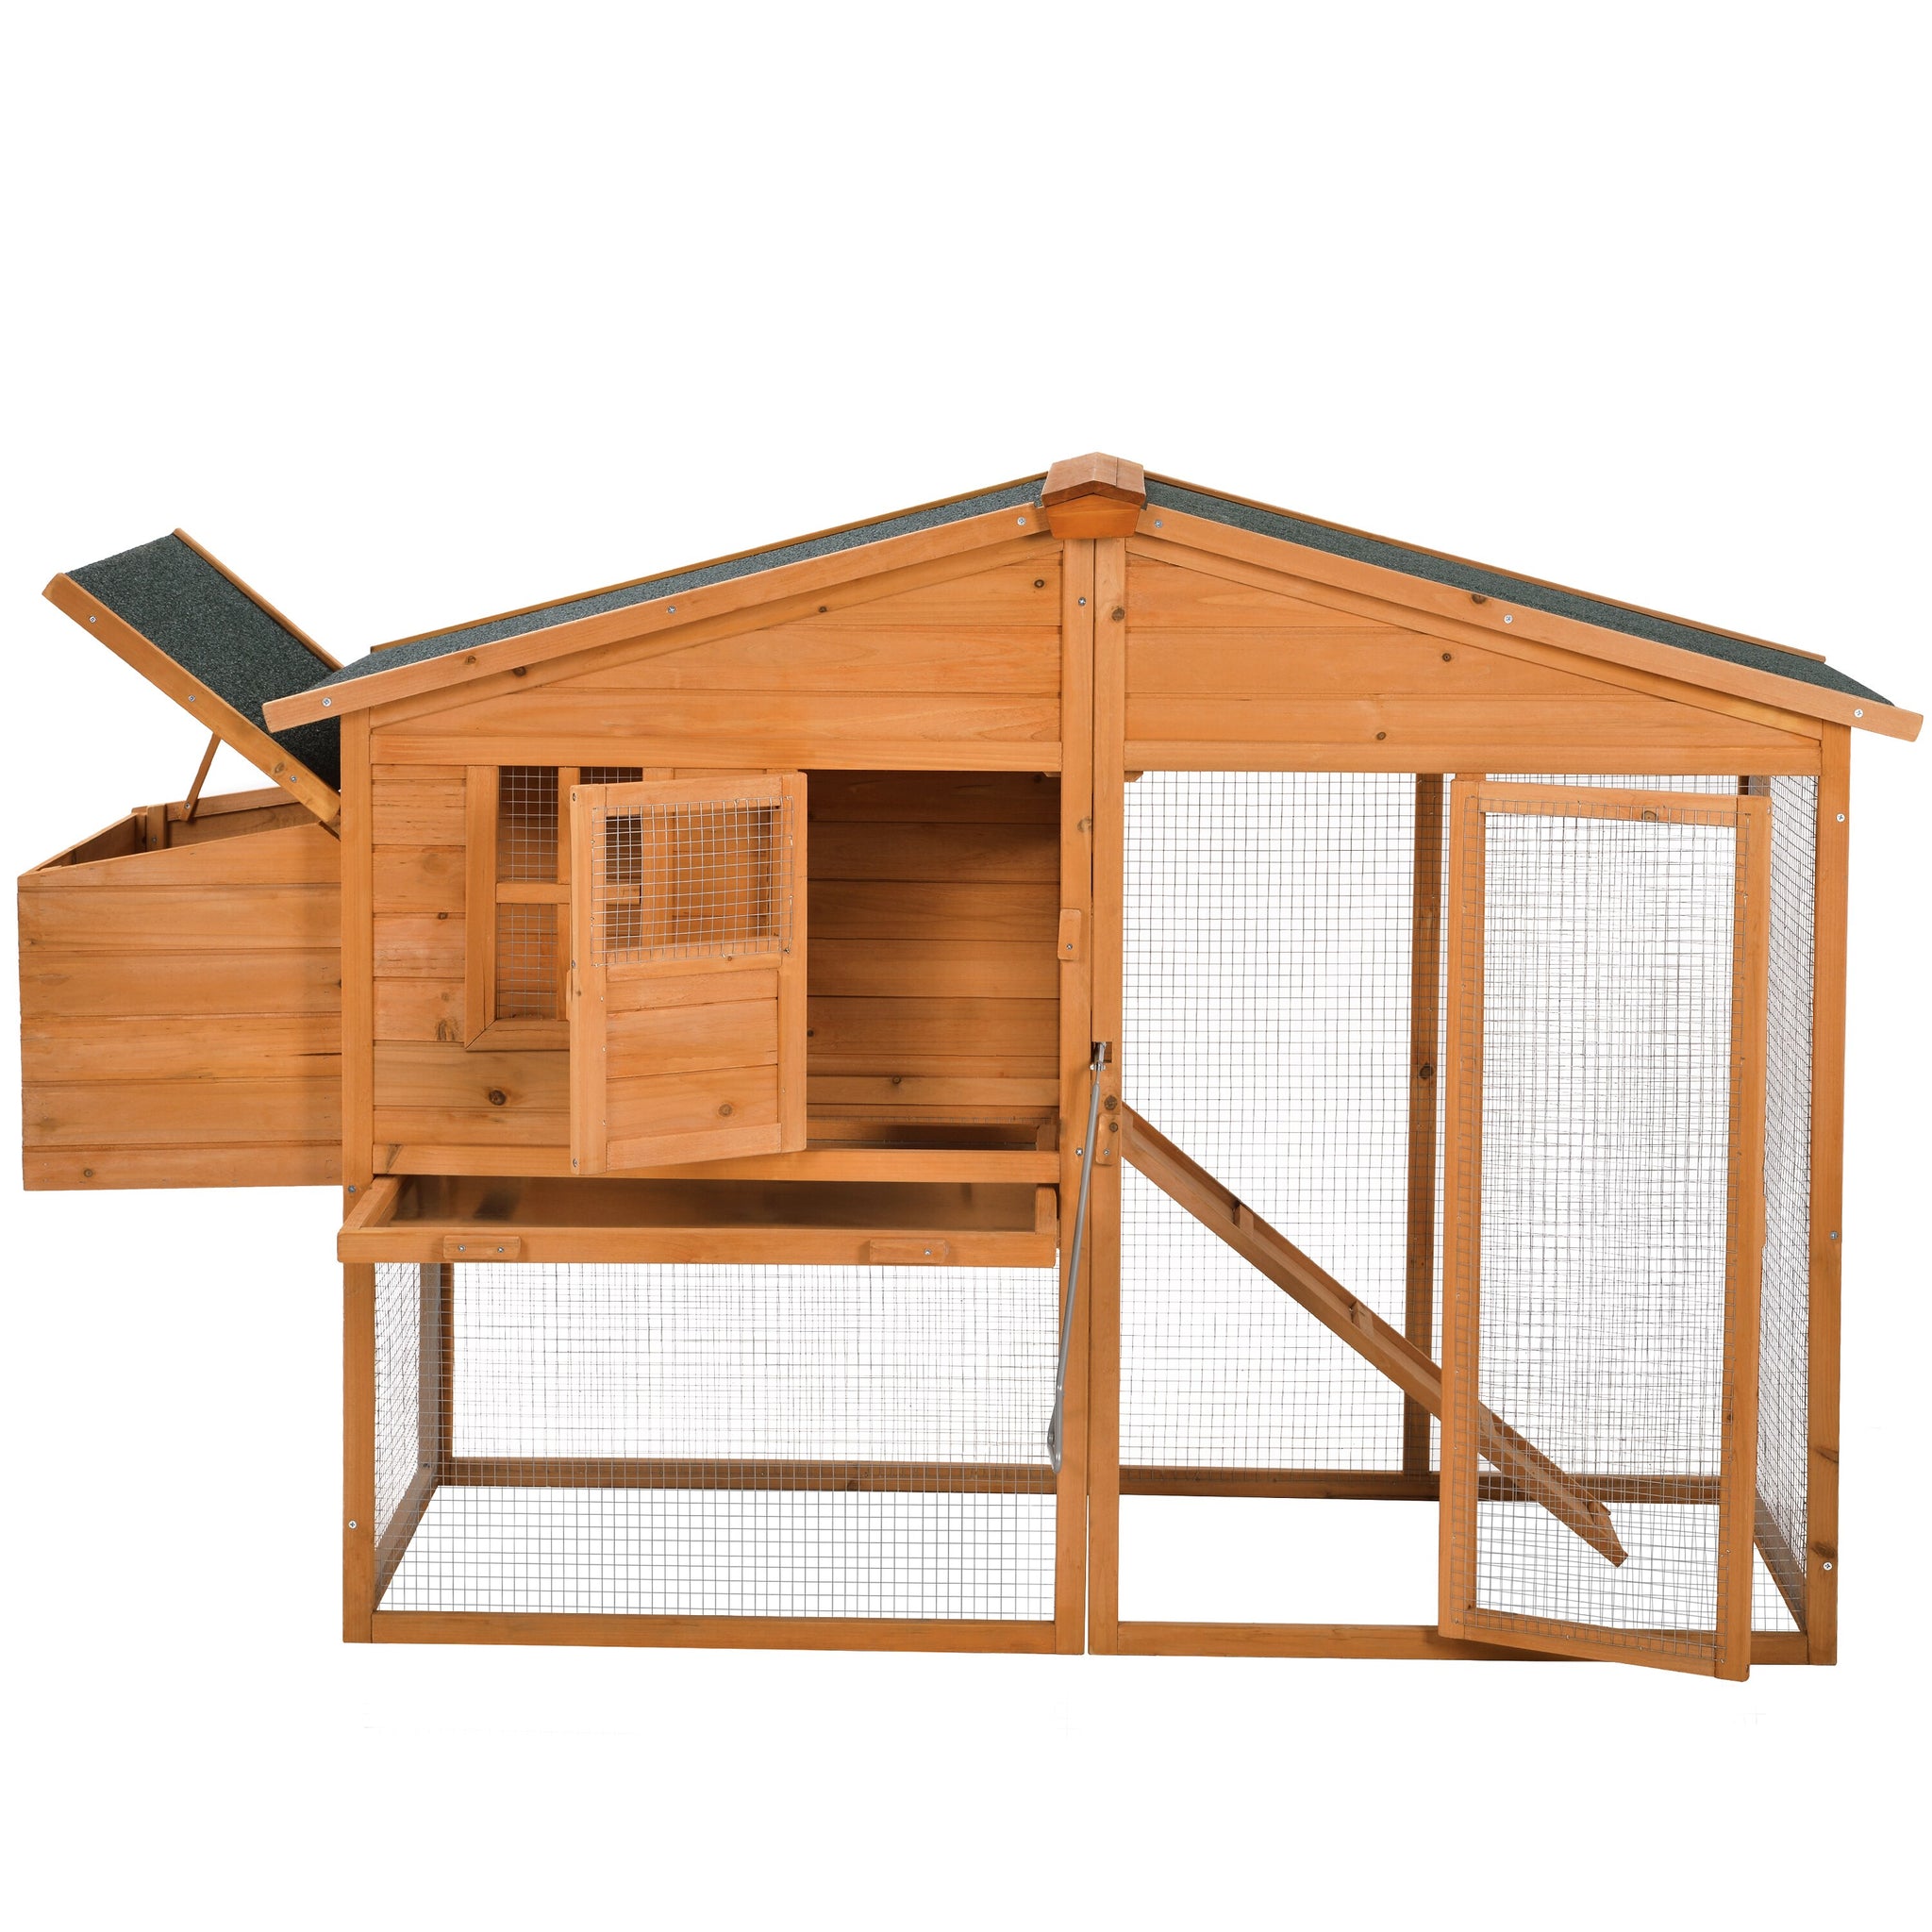 Two Colors 73.6 ”Large Wooden Chicken Coop Small Animal House Rabbit Hutch with Tray and Ramp